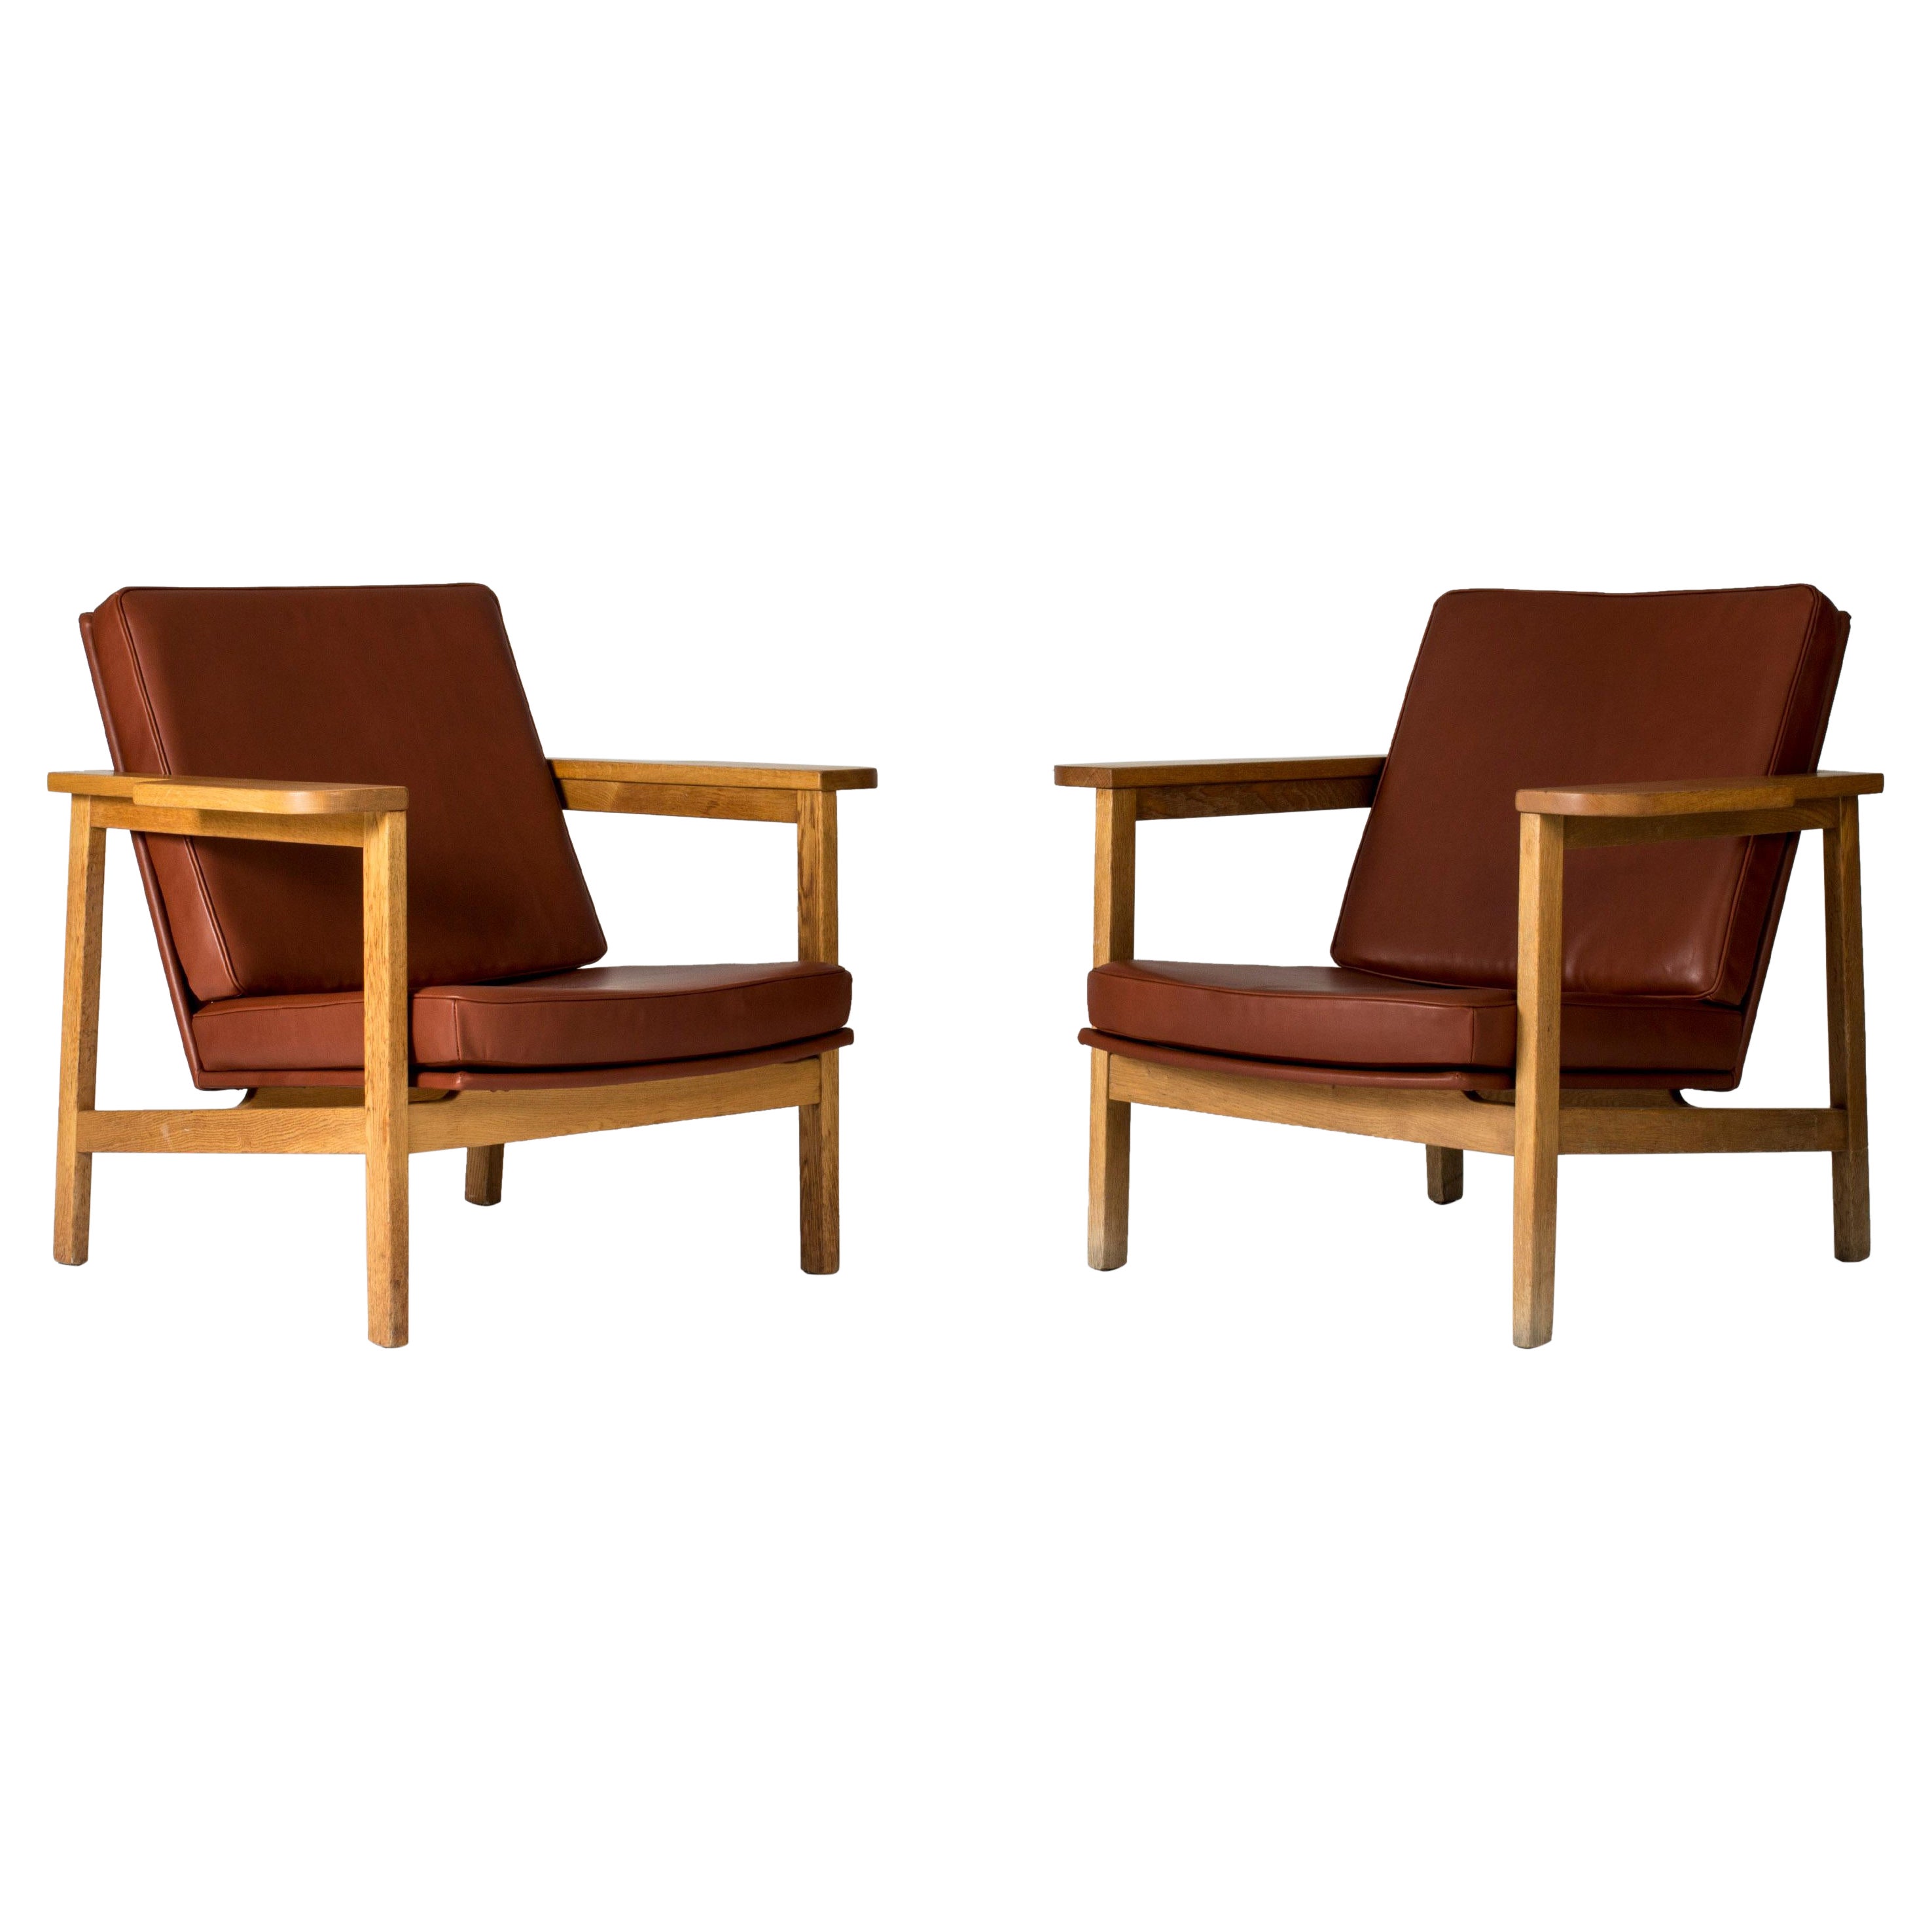 Pair of Lounge Chairs by Carl-Axel Acking for Nordiska Kompaniet, Sweden, 1950s